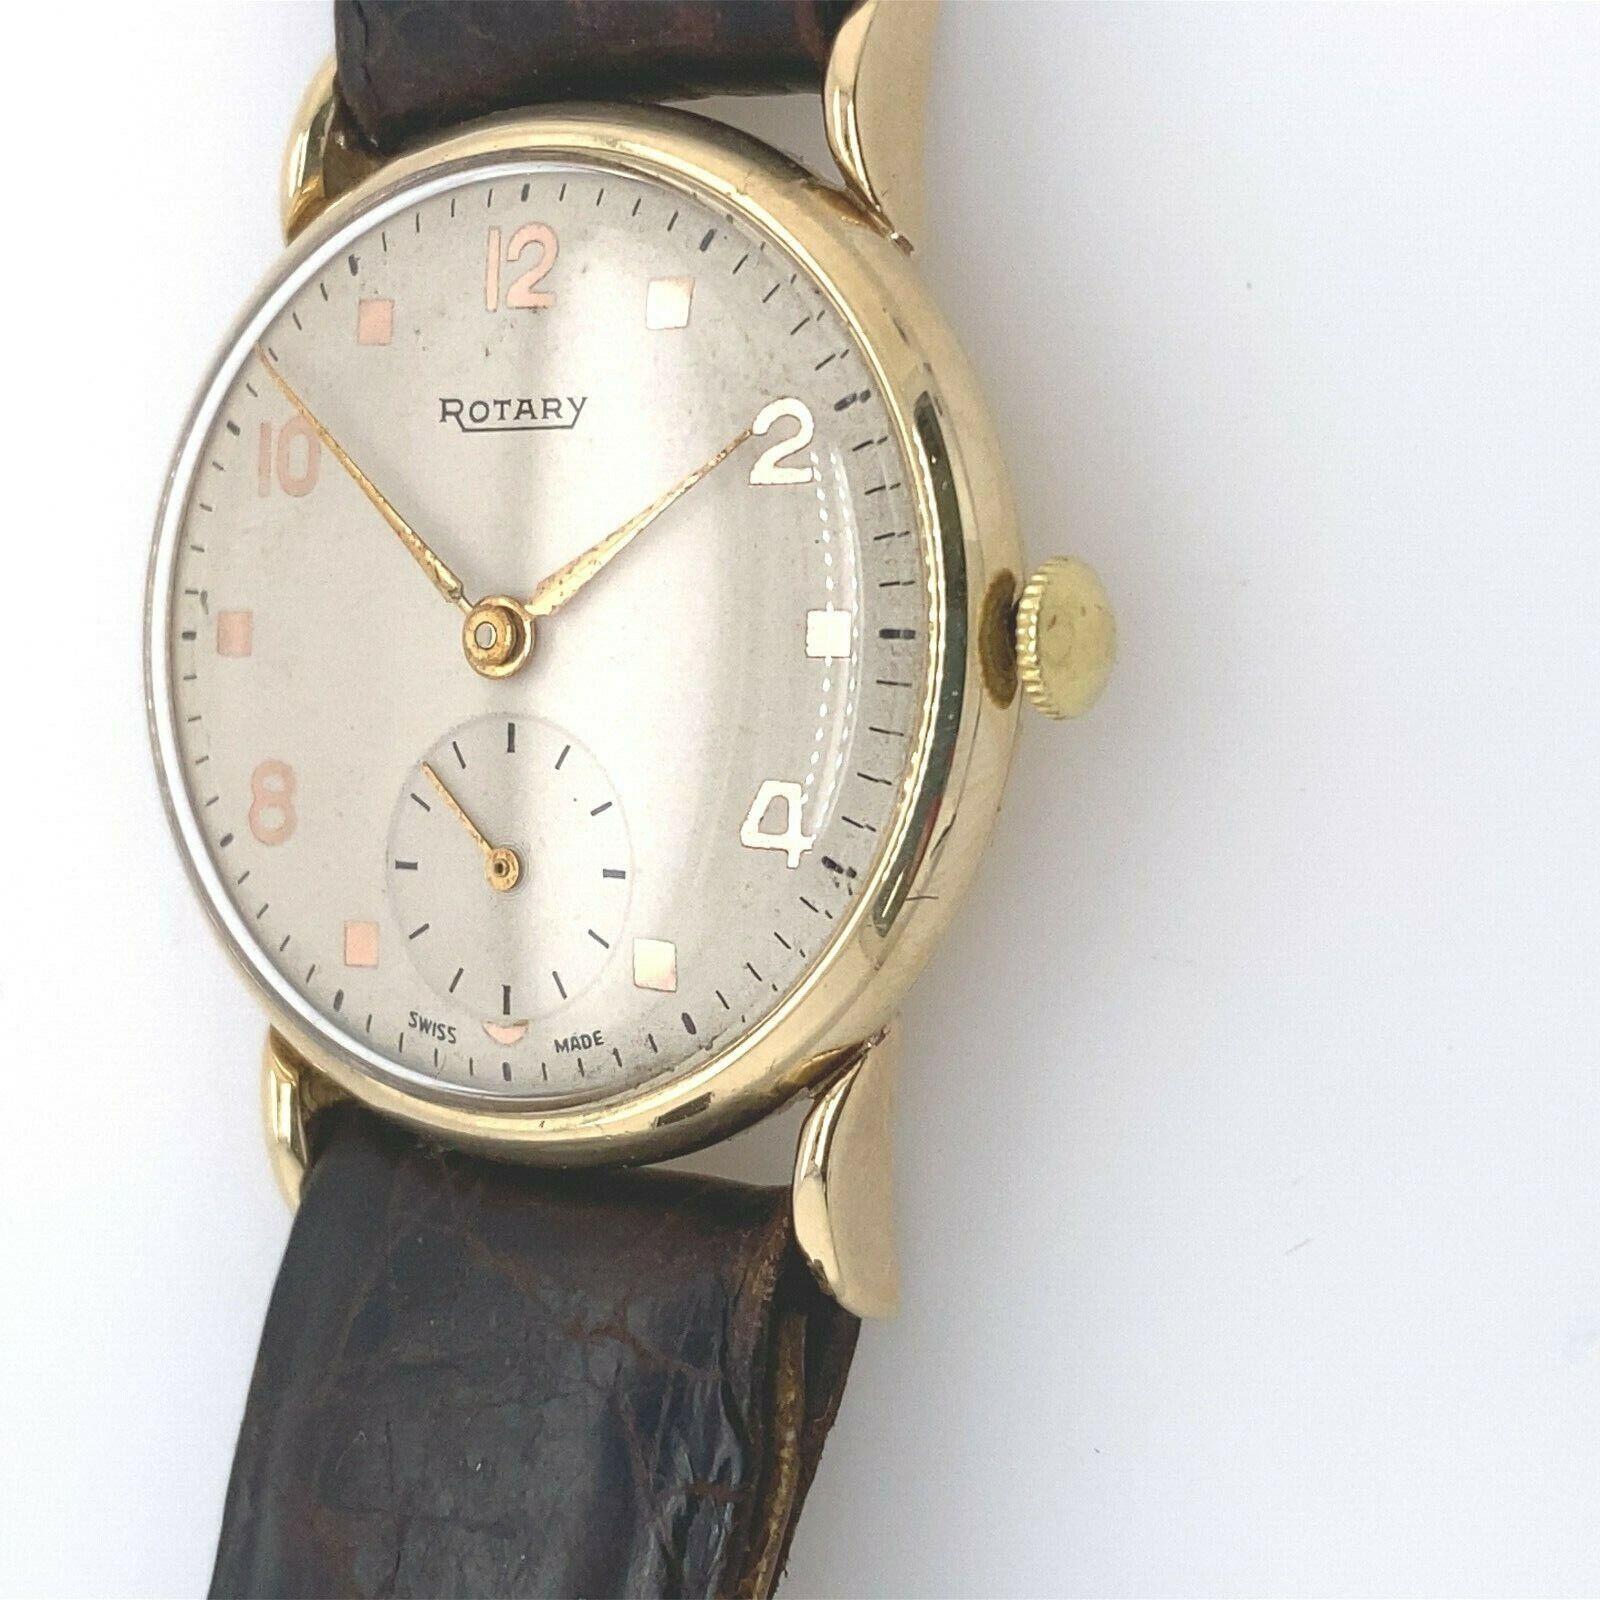 Vintage 9ct Gold Rotary Watch, With Original Brown Leather Strap

In Perfect Working Condition.

Additional Information:
Case Size: 30mm
Case Thickness: 5mm
Lug Width: 18 mm
Case Material: 9ct gold
Strap Width: 18 mm
Lug Width: 18 mm
SMS4121